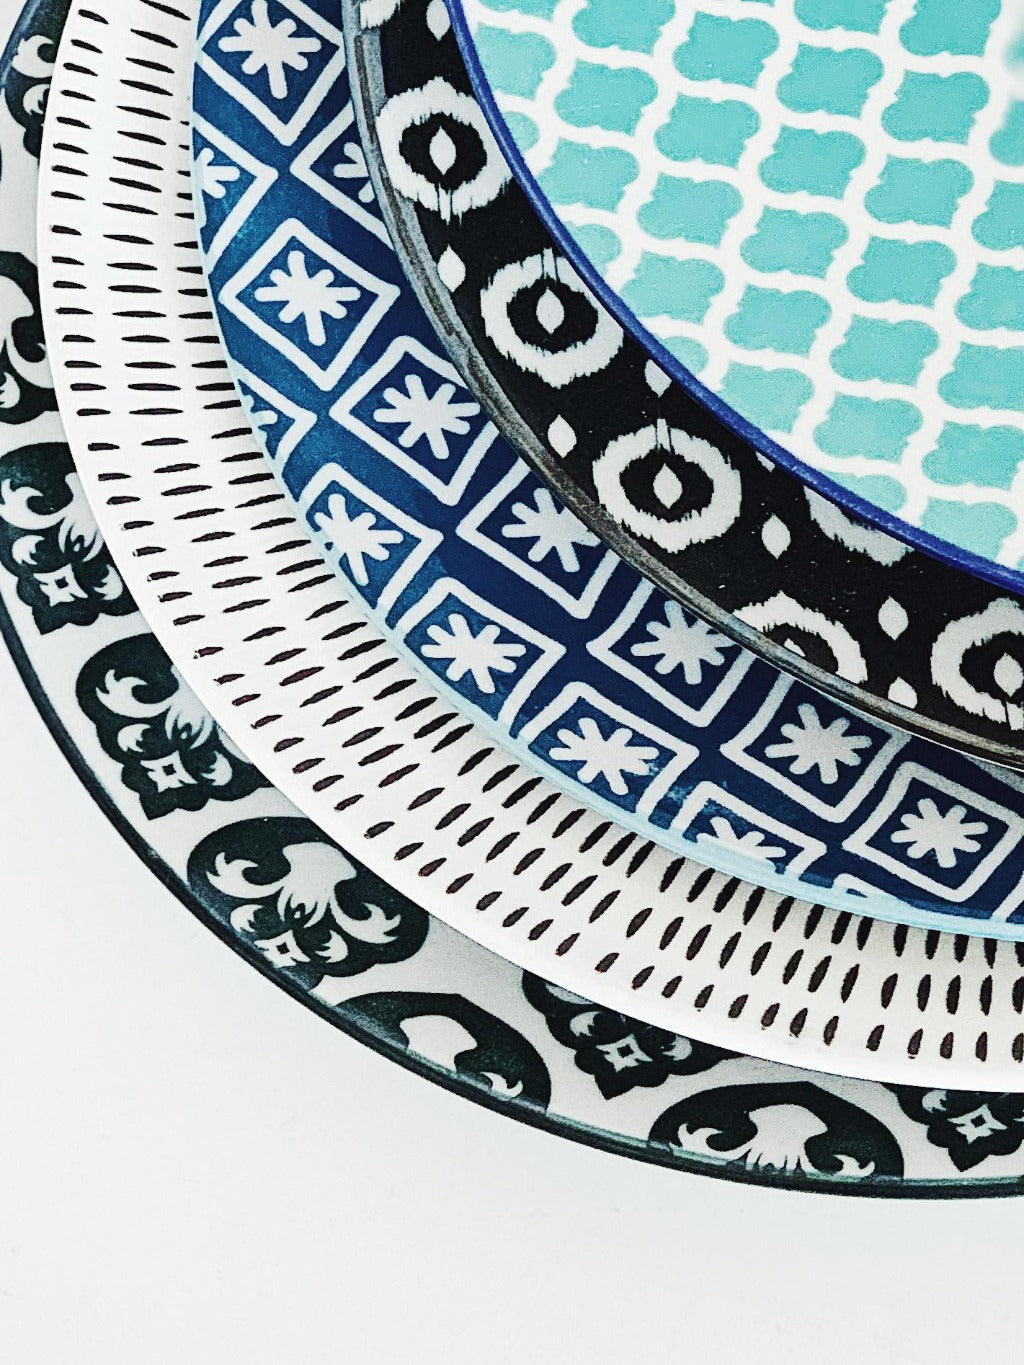 Moroccan Style Dinner Plate Large – perfect for serving dinner or large meals - Moroccan Style Dinnerware - Mix & Match - 27cmW x 2cmH - wide range of colours and patterns - Commercial Grade quality - Patterns Picked at random |Bliss Gifts & Homewares - Unit 8, 259 Princes Hwy Ulladulla - Shop Online - 0427795959, 44541523 - Australia wide shipping – AfterPay Available 